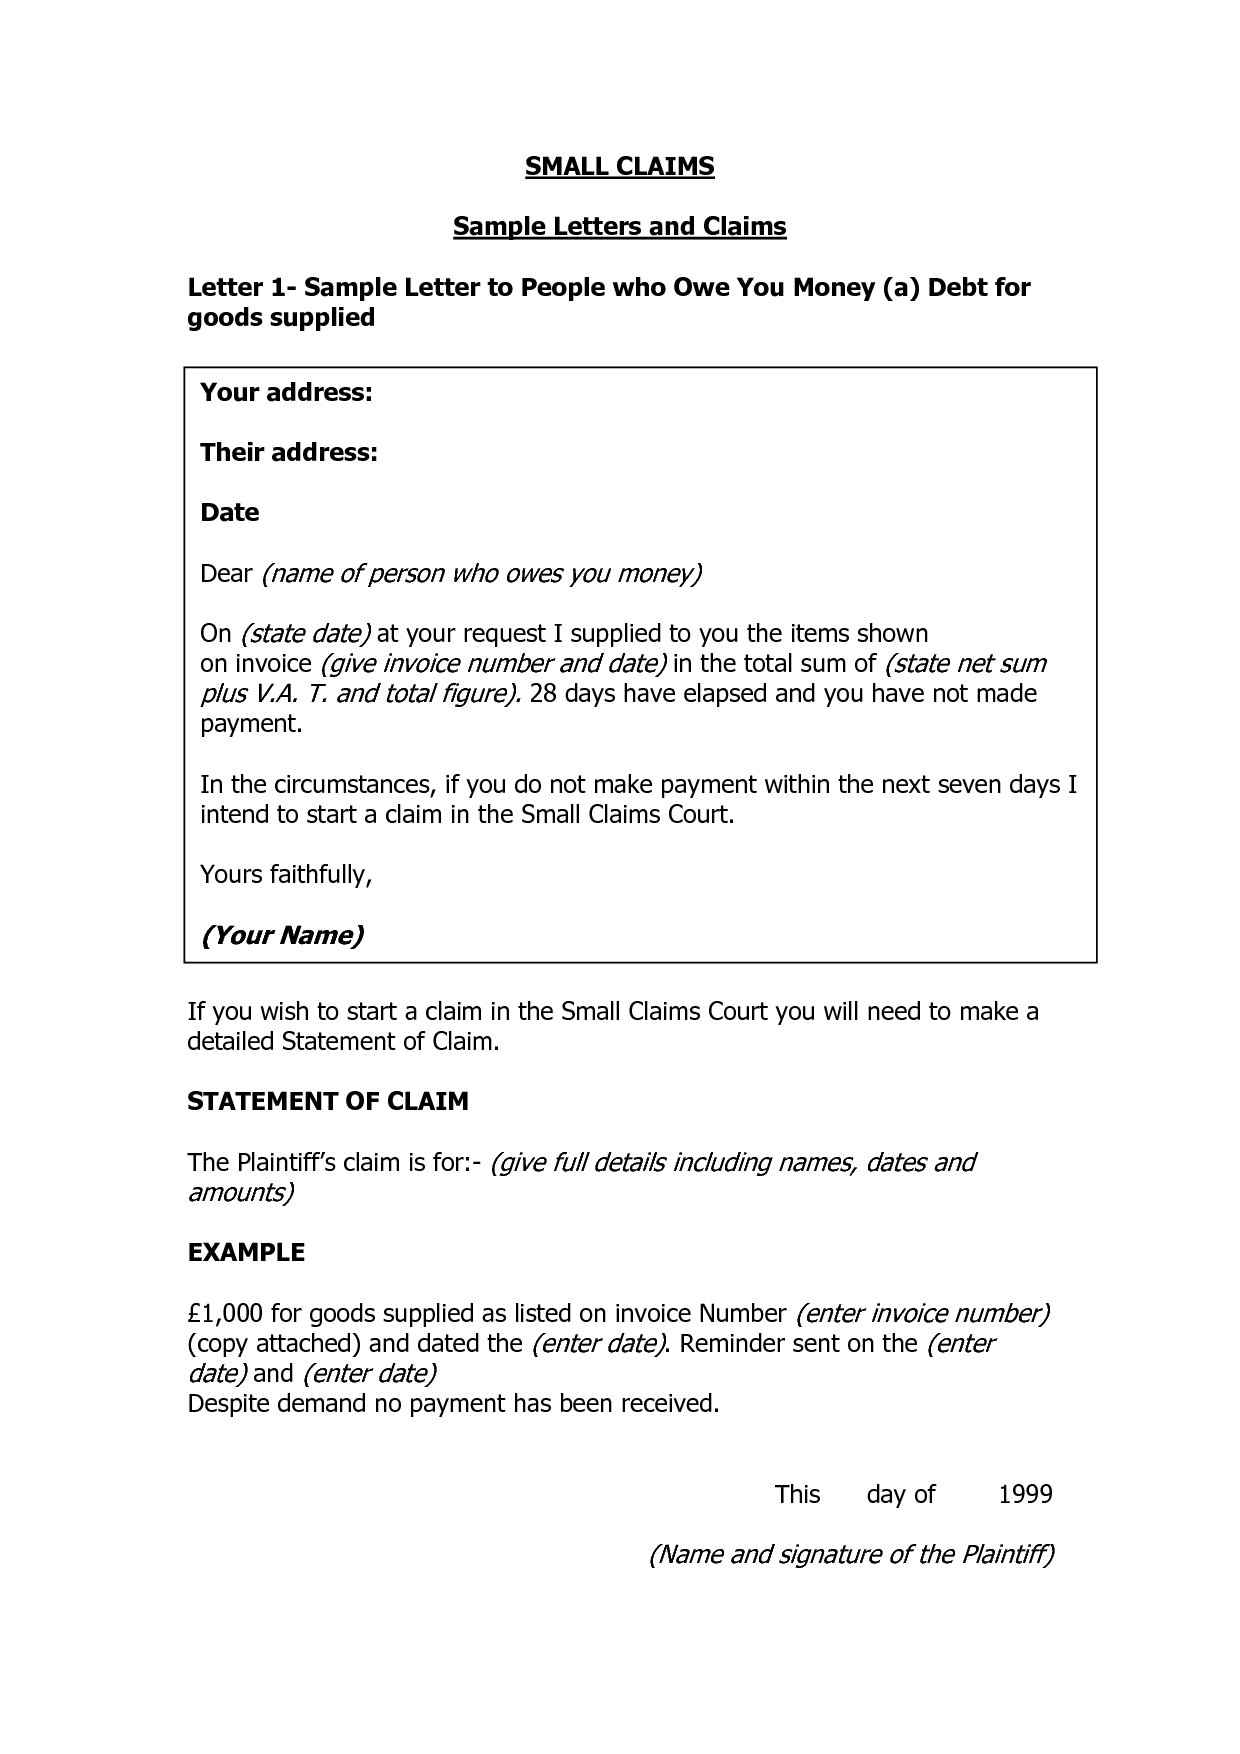 I Owe You Letter Template - How to Write A Letter when someone Owes You Money Letter